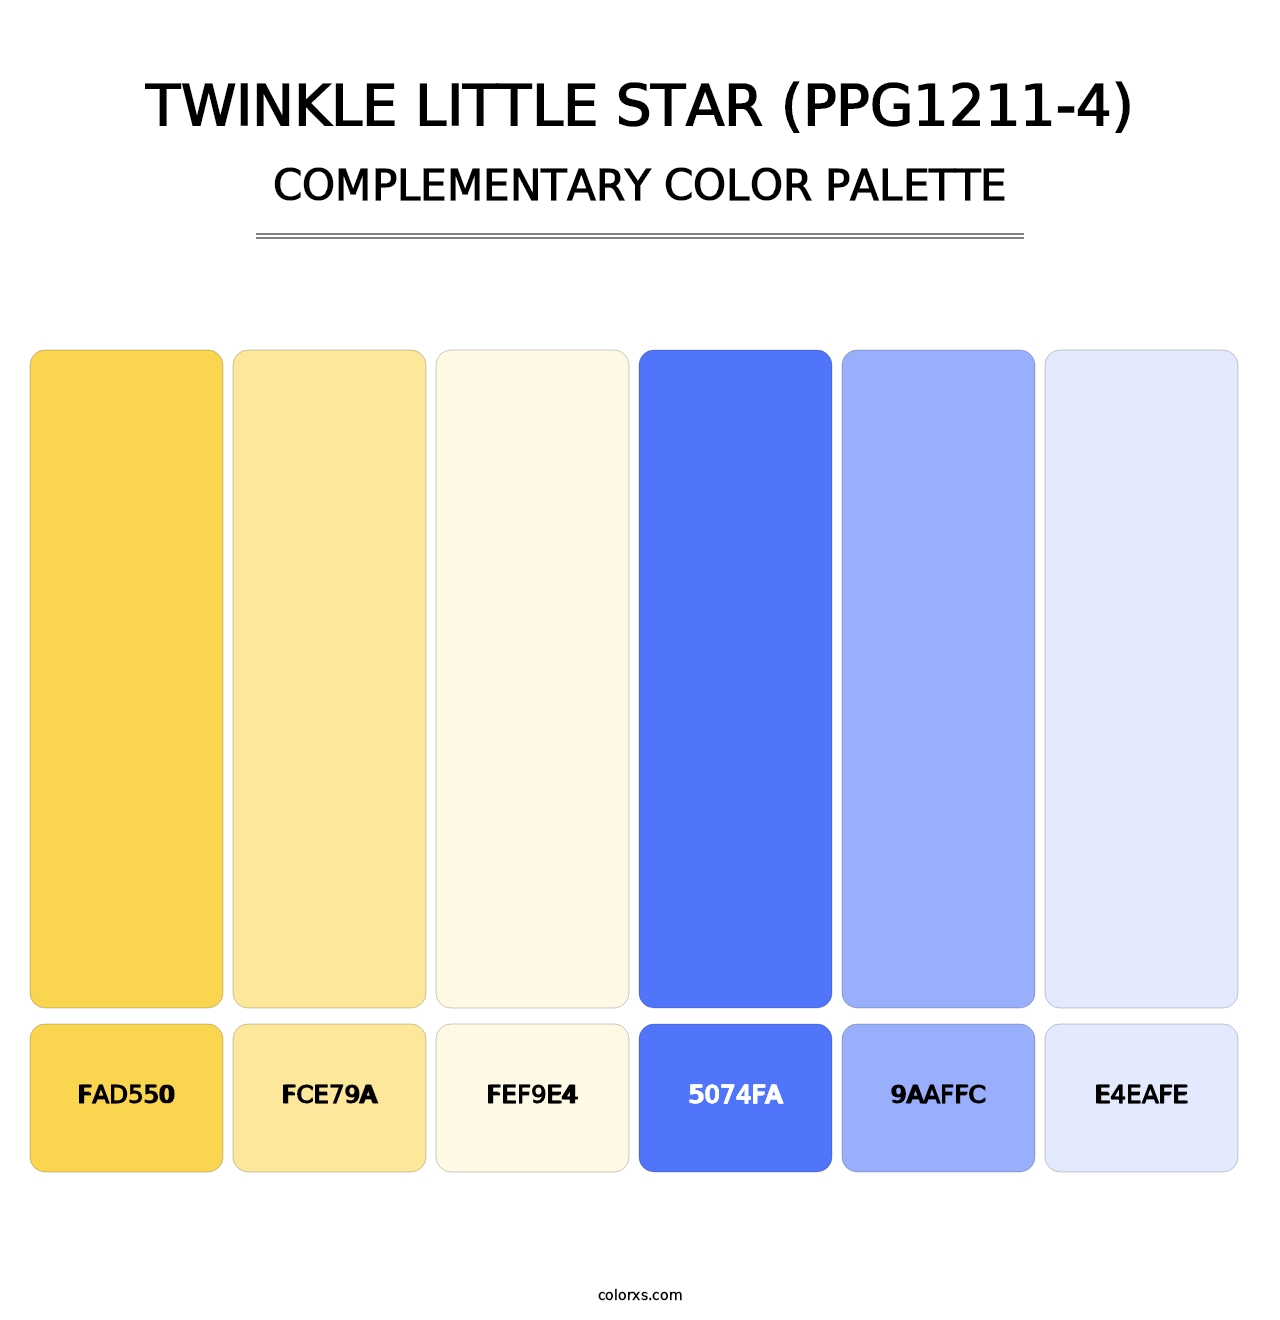 Twinkle Little Star (PPG1211-4) - Complementary Color Palette